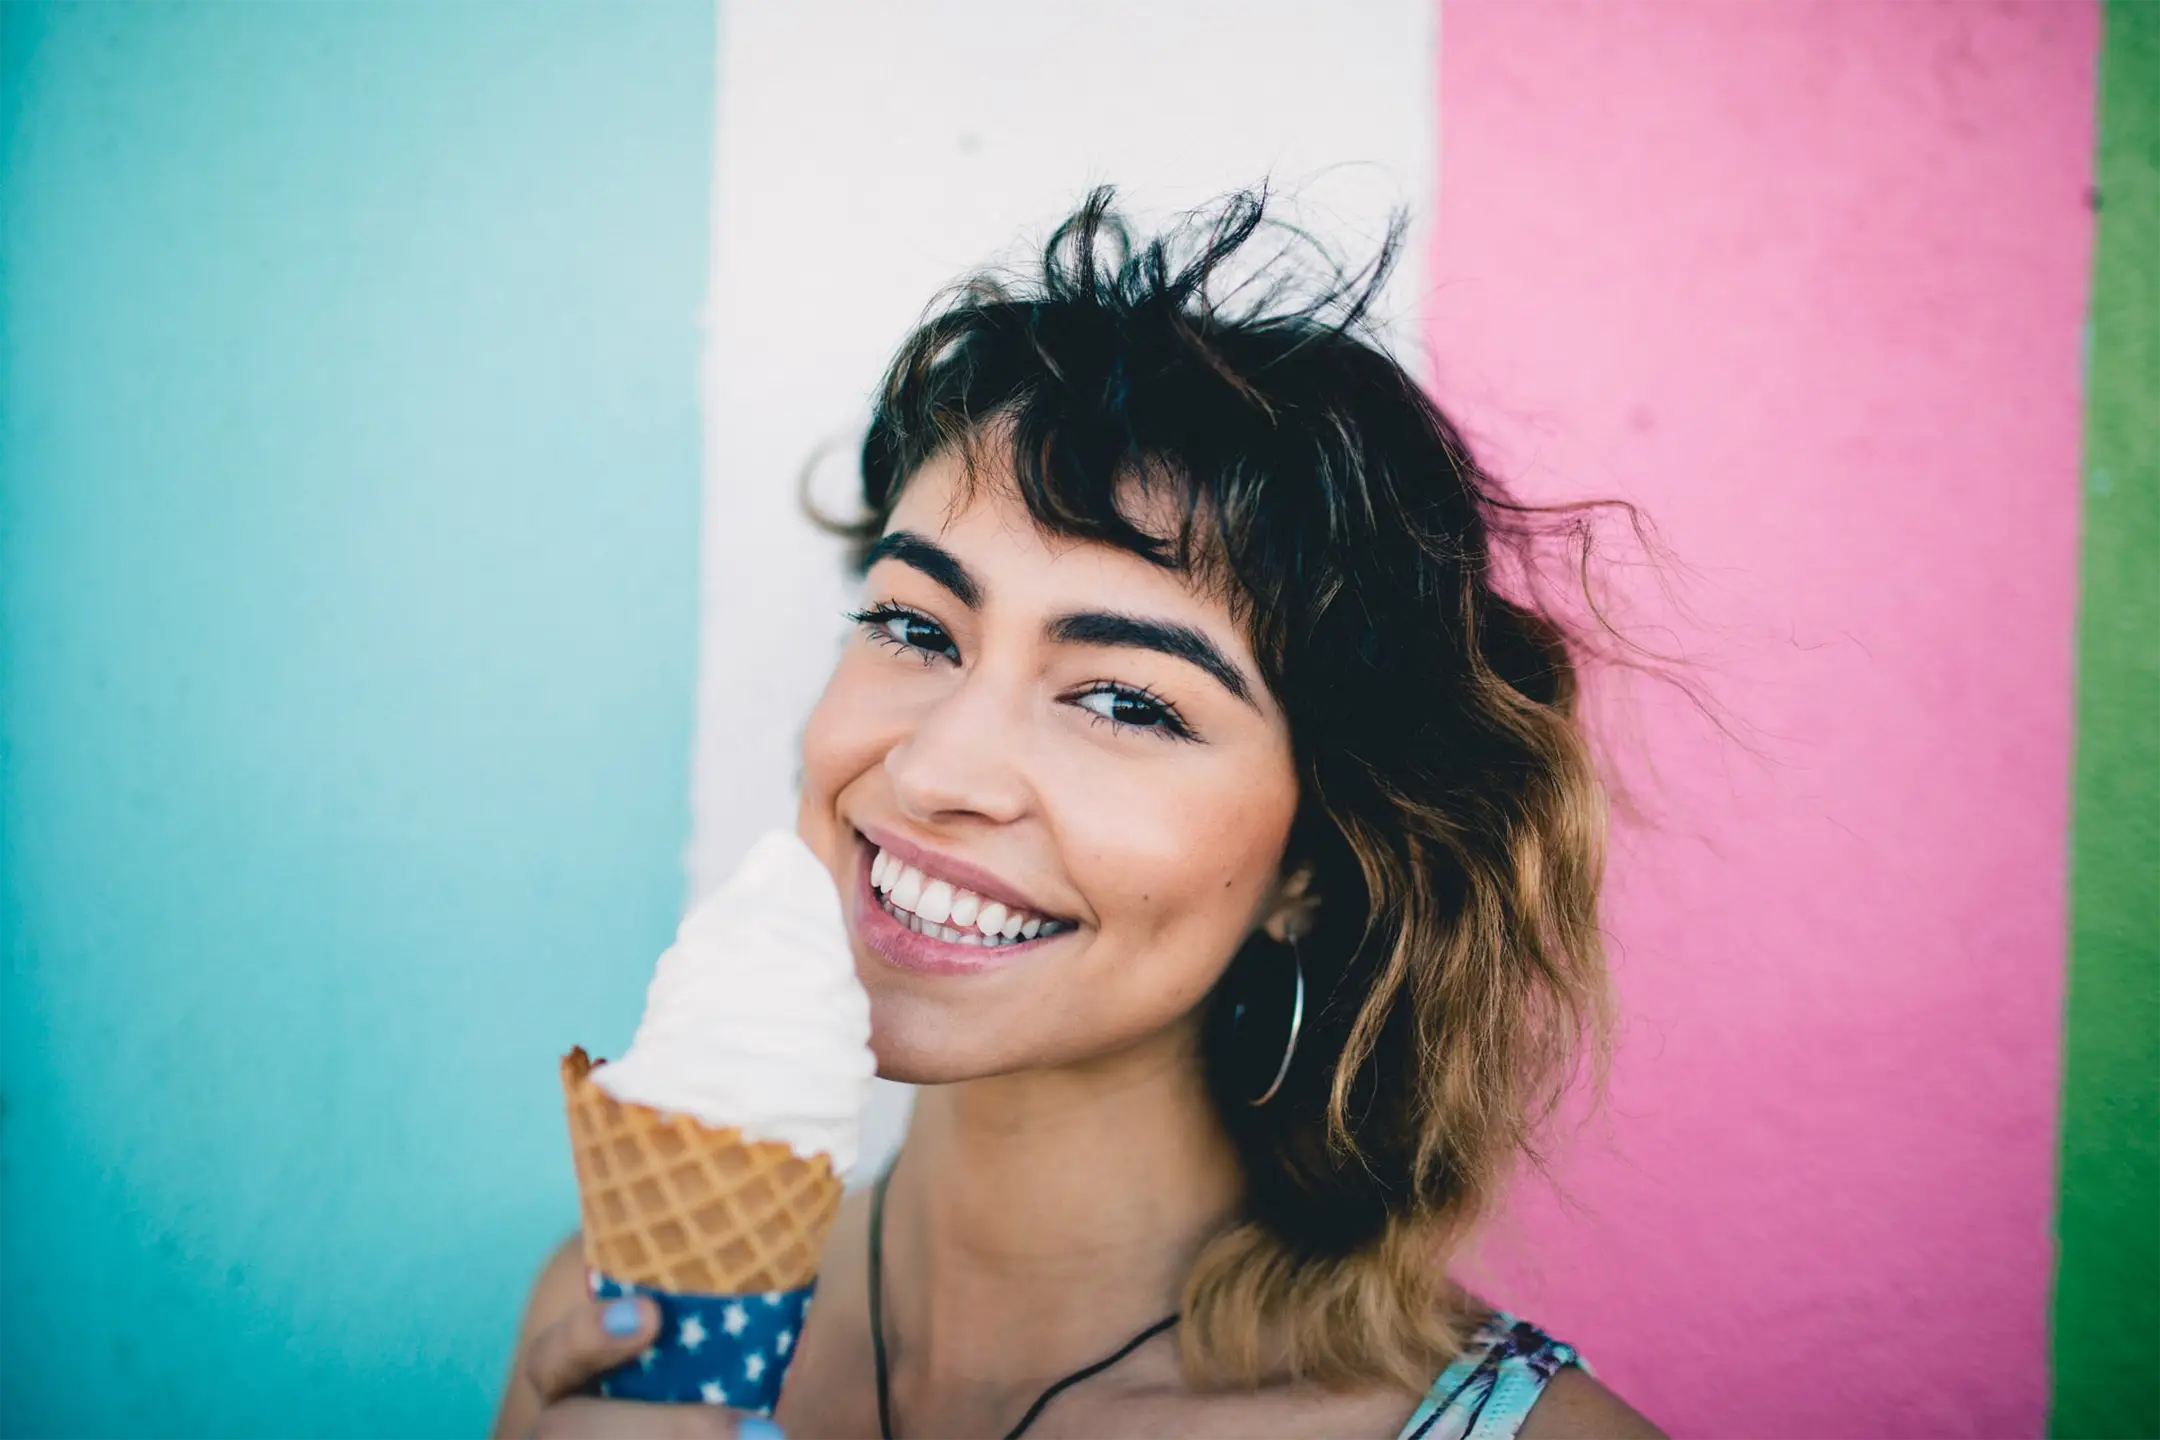 A joyful young woman with short curly brown hair, holding a vanilla ice cream cone in her hand, smiling brightly against a colorful background divided into three vertical stripes of turquoise, pink, and green